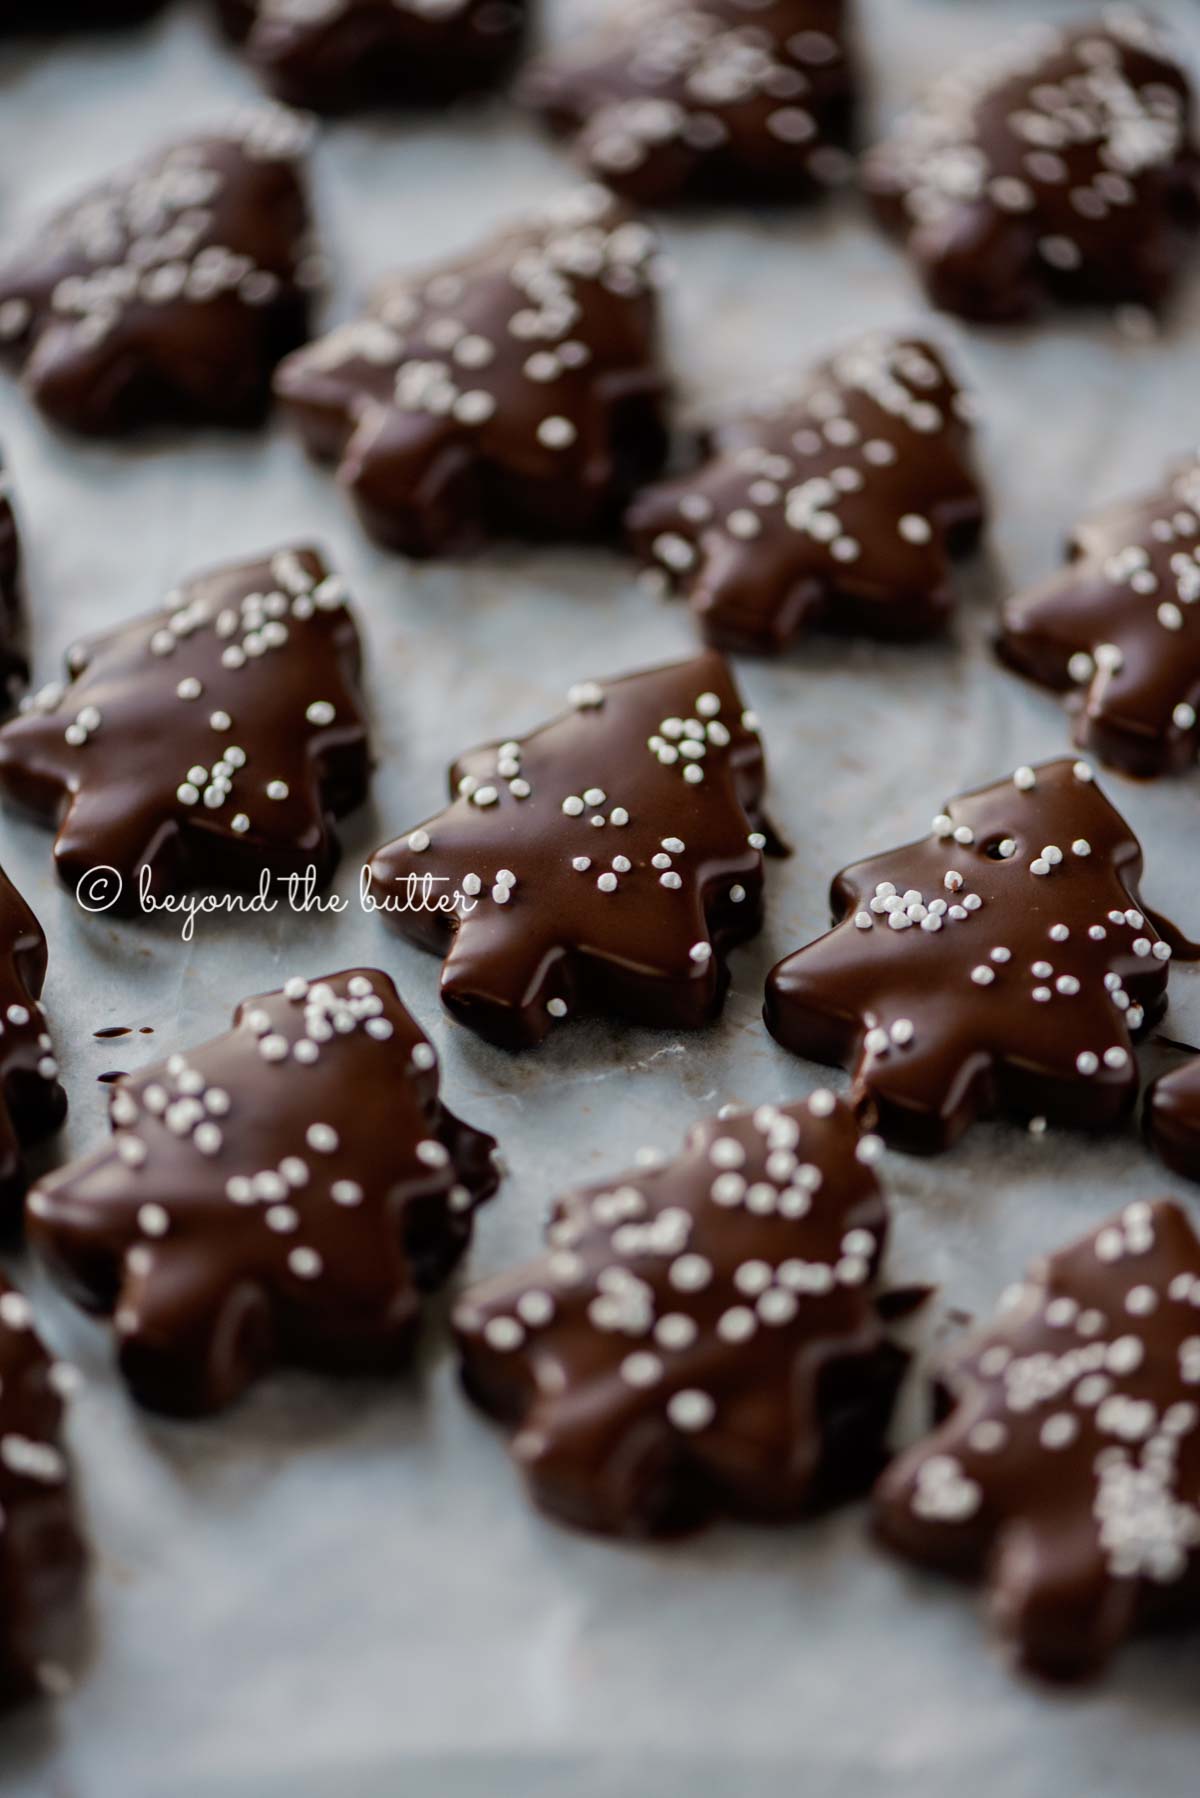 Chocolate Dipped Graham Cracker Chrismtas Trees on a cookie sheet | © Beyond the Butter®